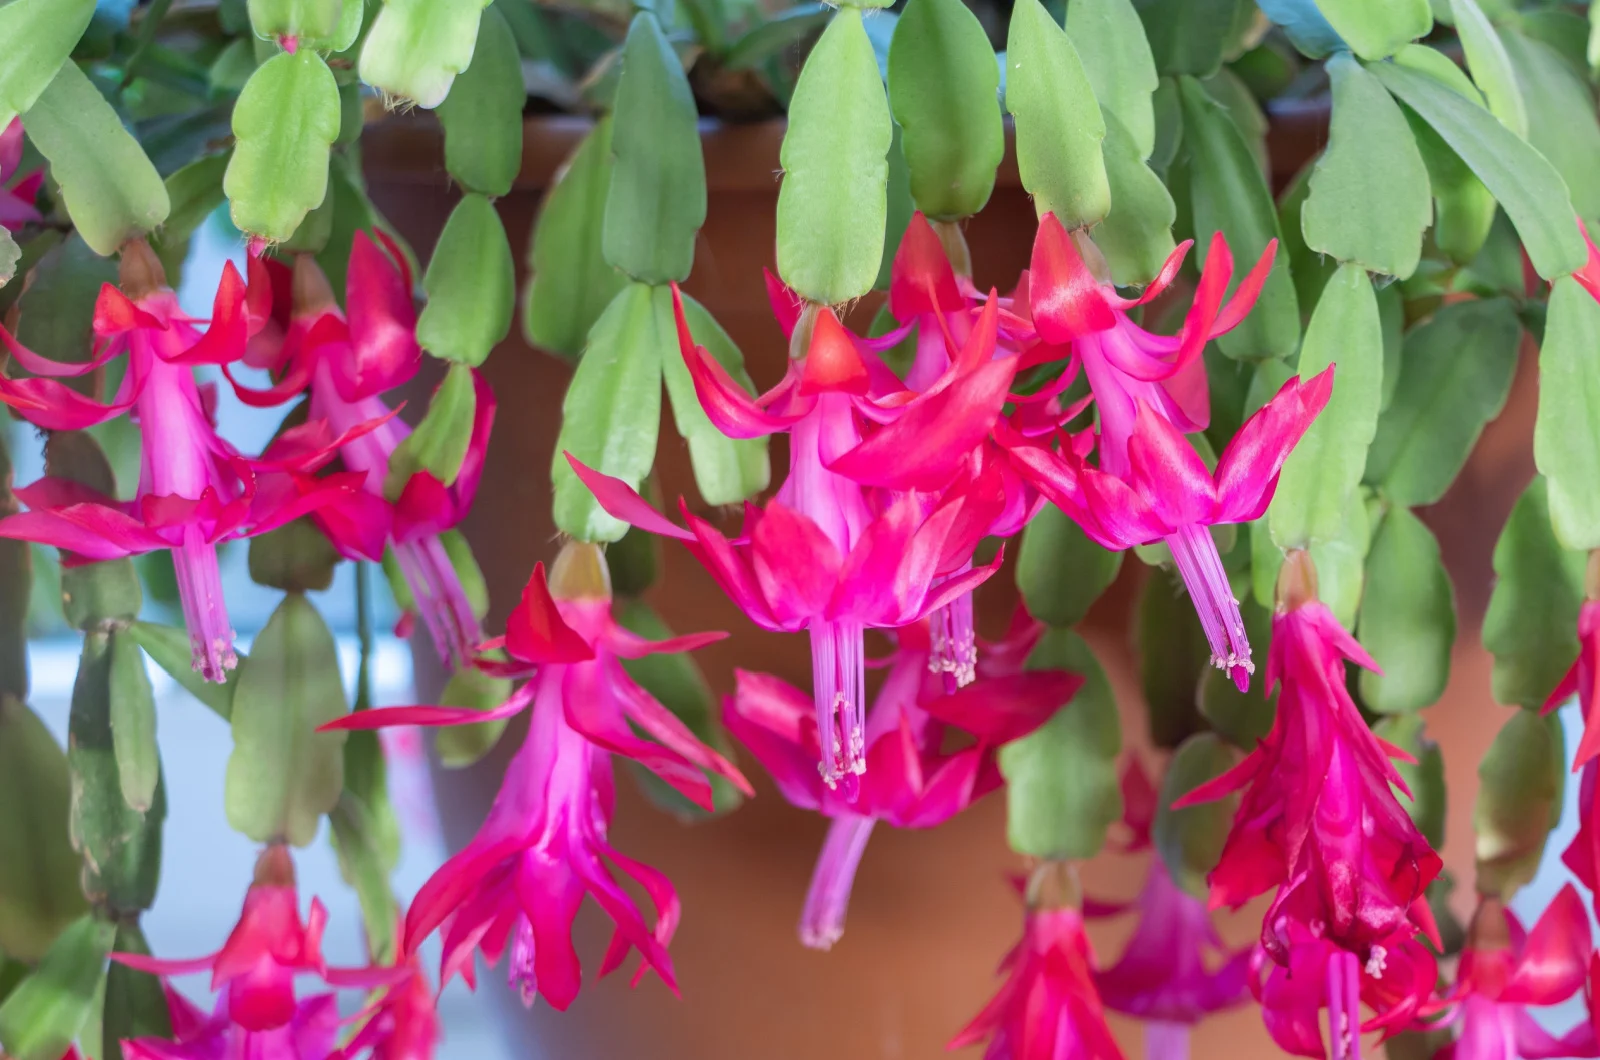 The Delicate Red Blooms of Christmas Cactus